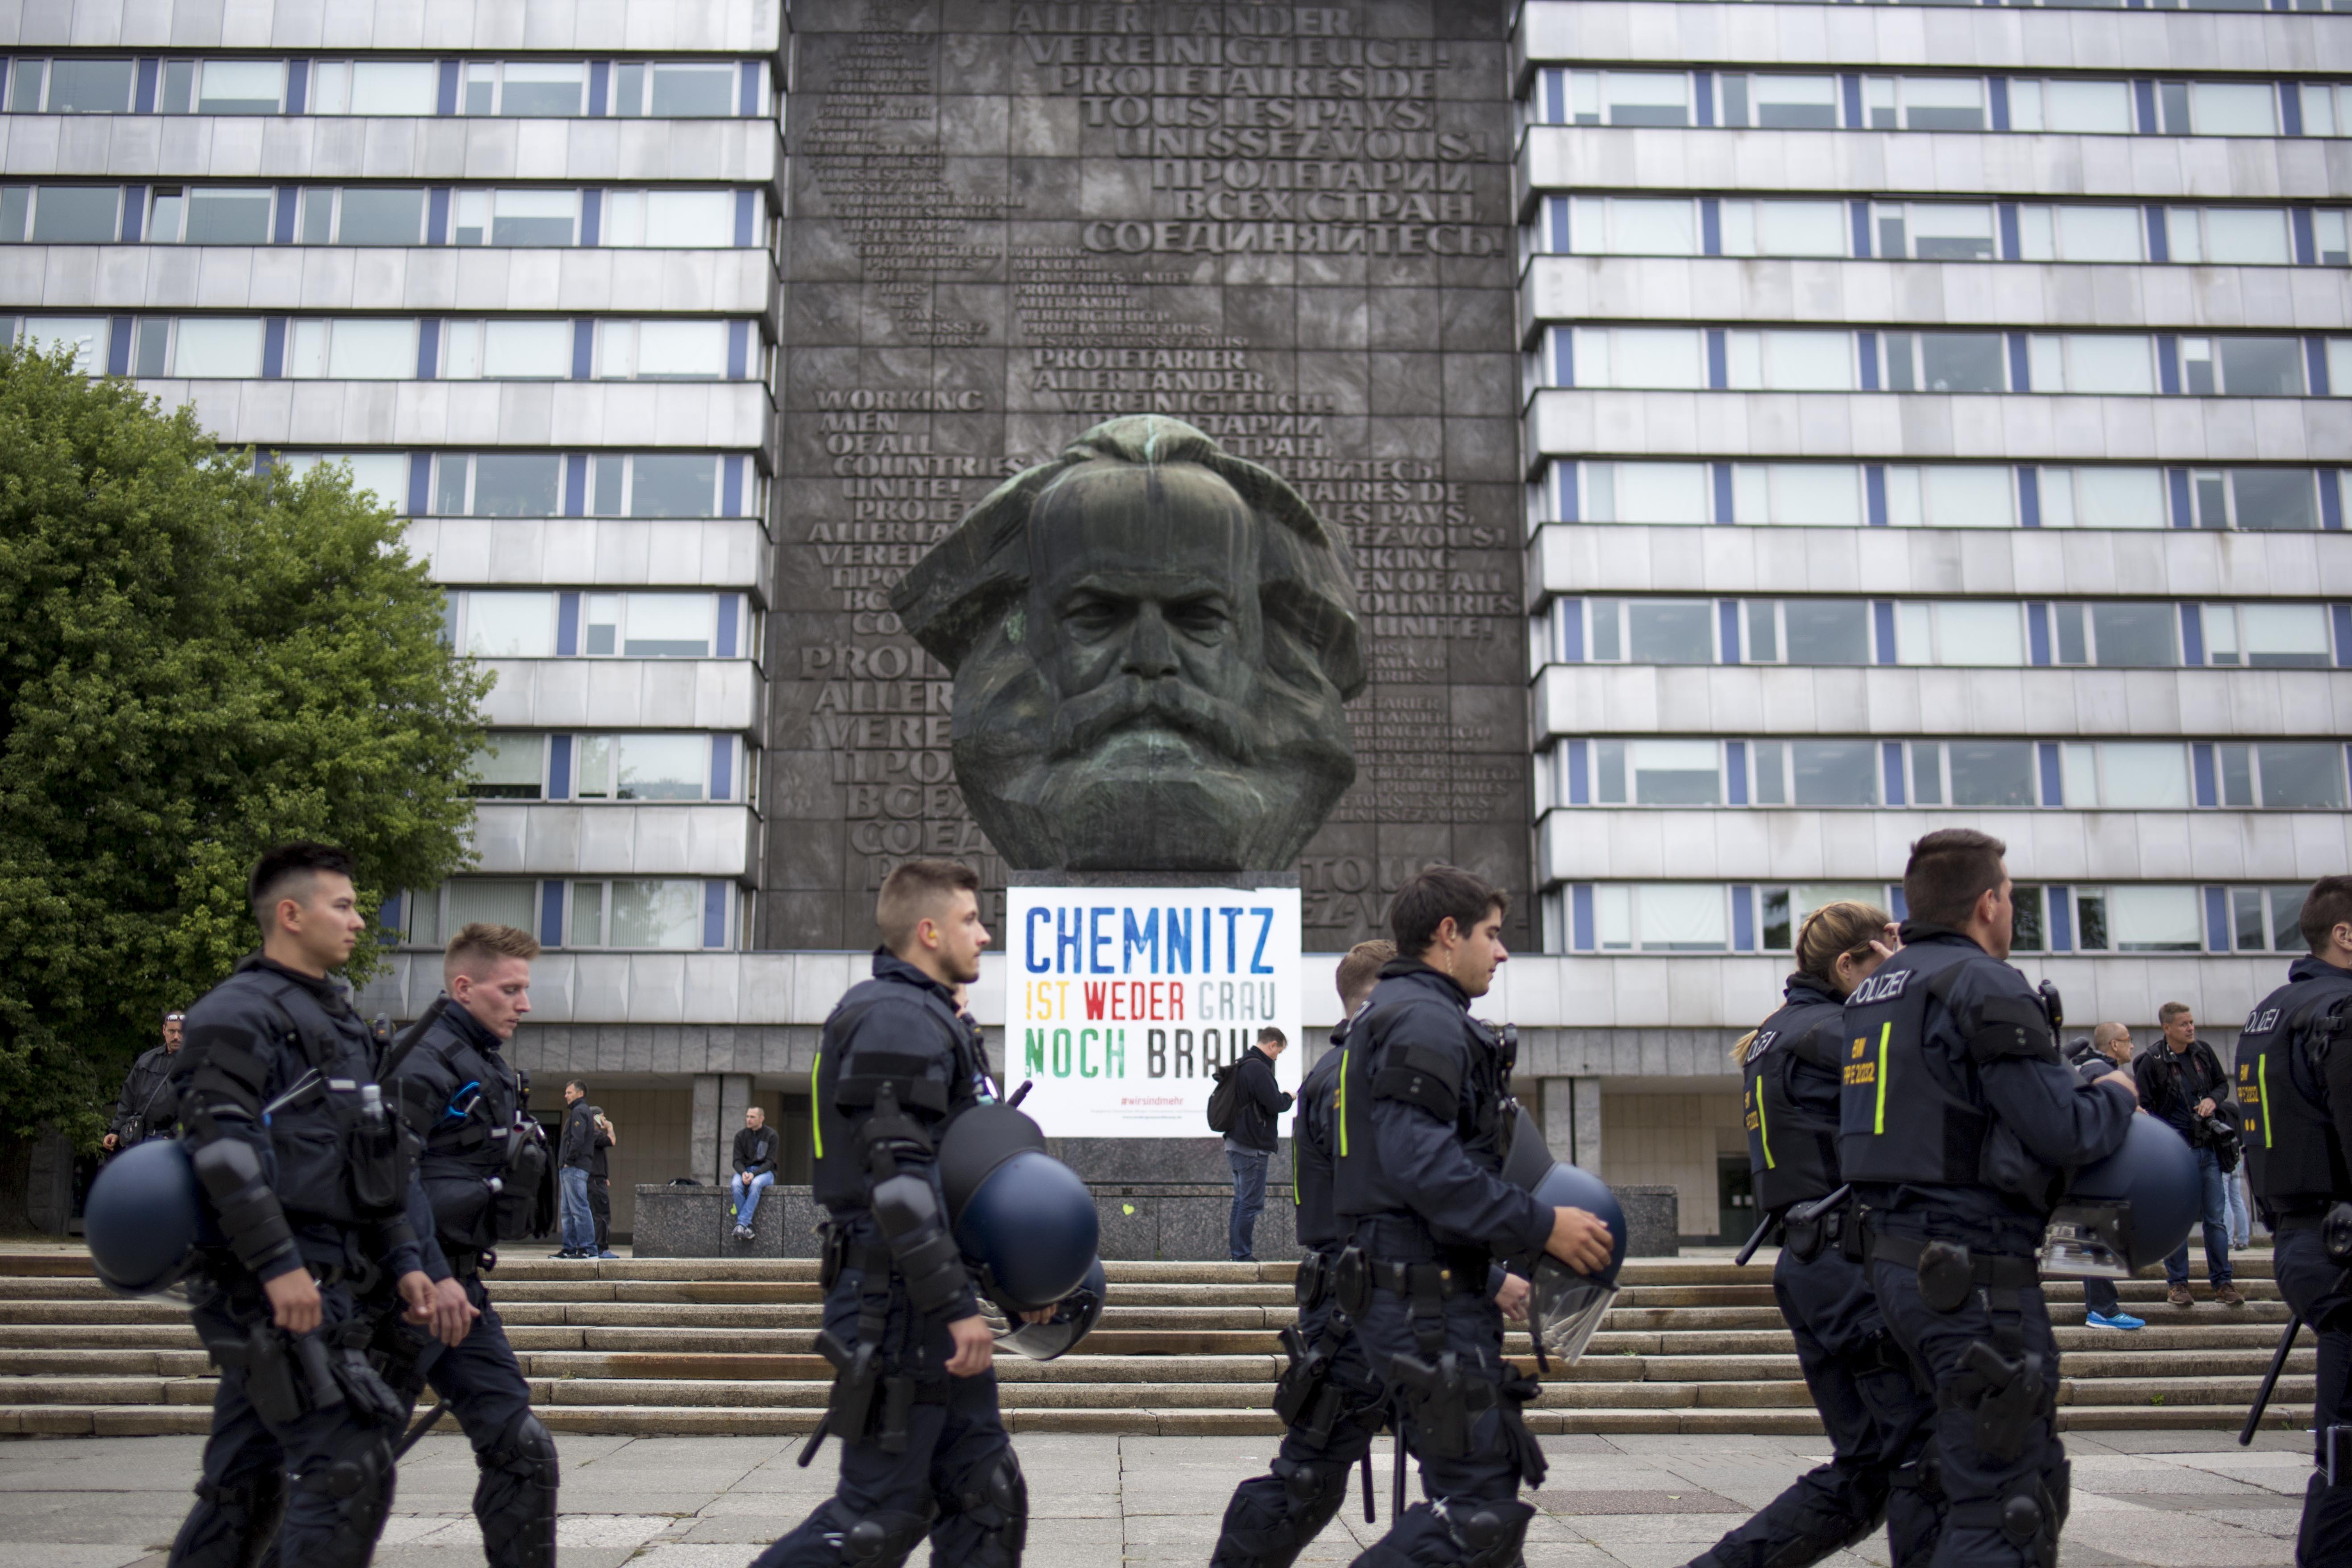 German church leaders condemn racism and ‘migrant-bashing’ in Chemnitz